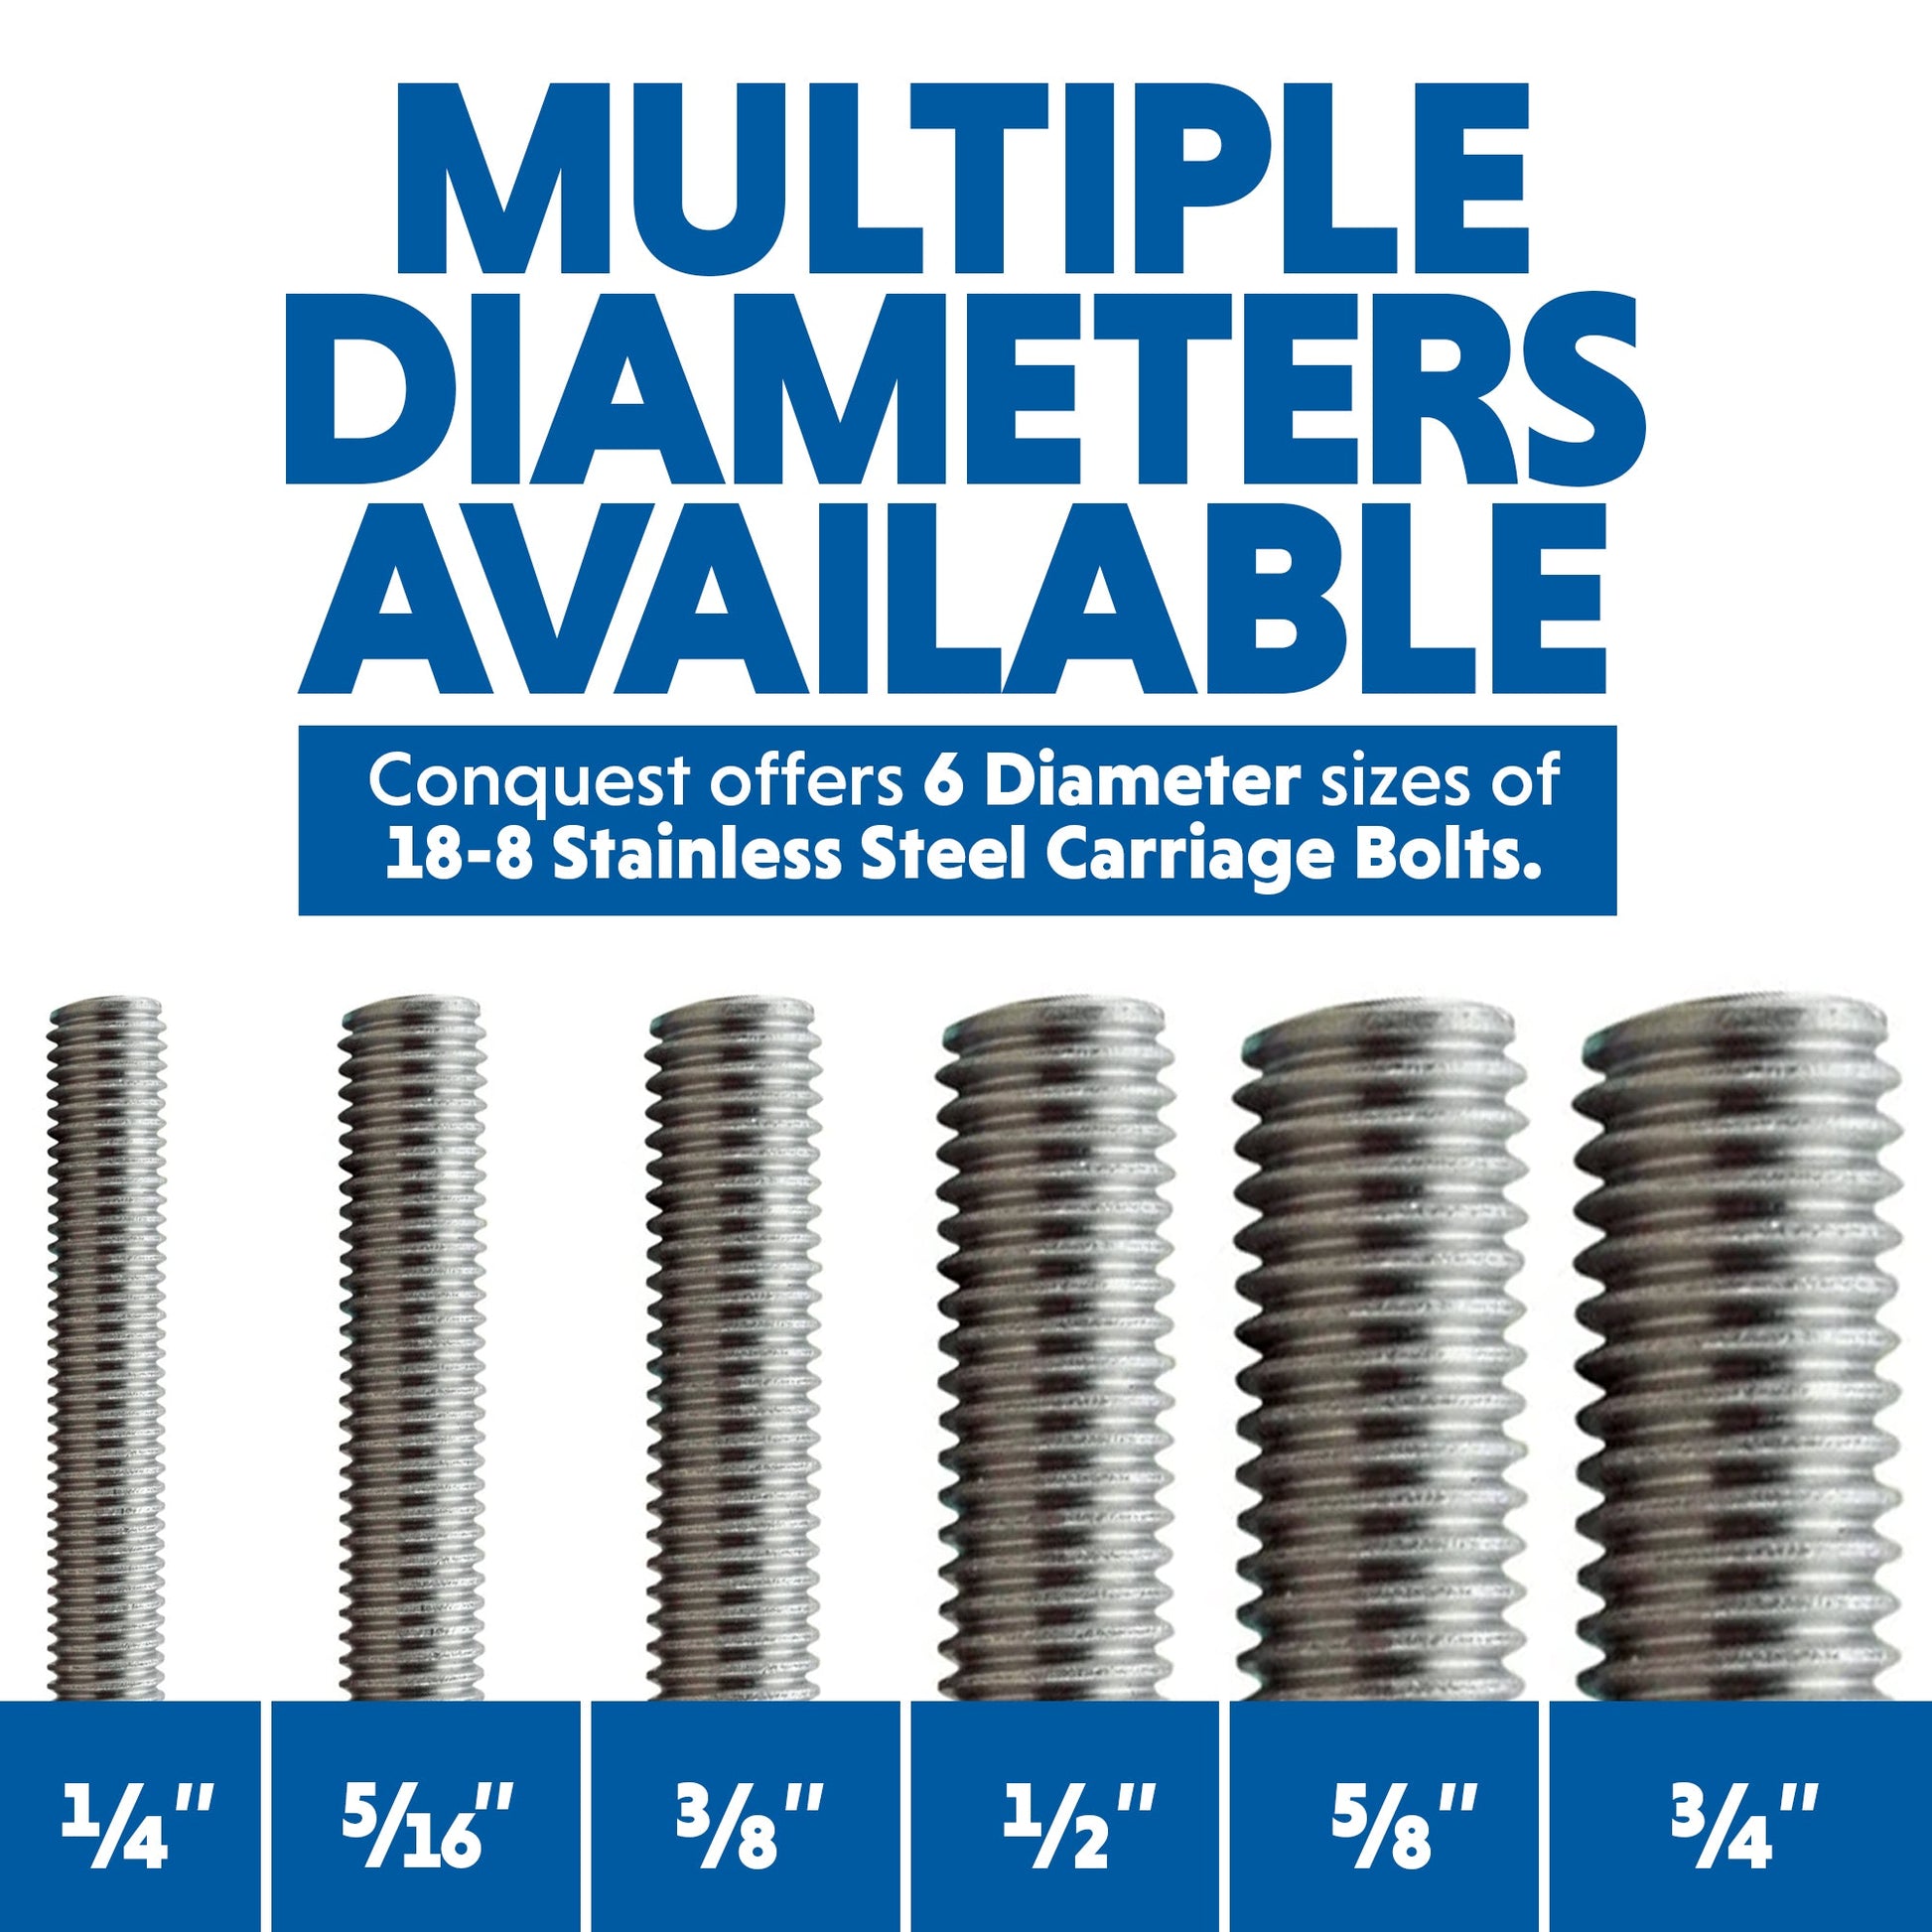 Conquest 18-8 Stainless Steel Carriage Bolts and Nuts are Available in 6 Diameters: 1/4", 5/16", 3/8", 1/2", 5/8" and 3/4"